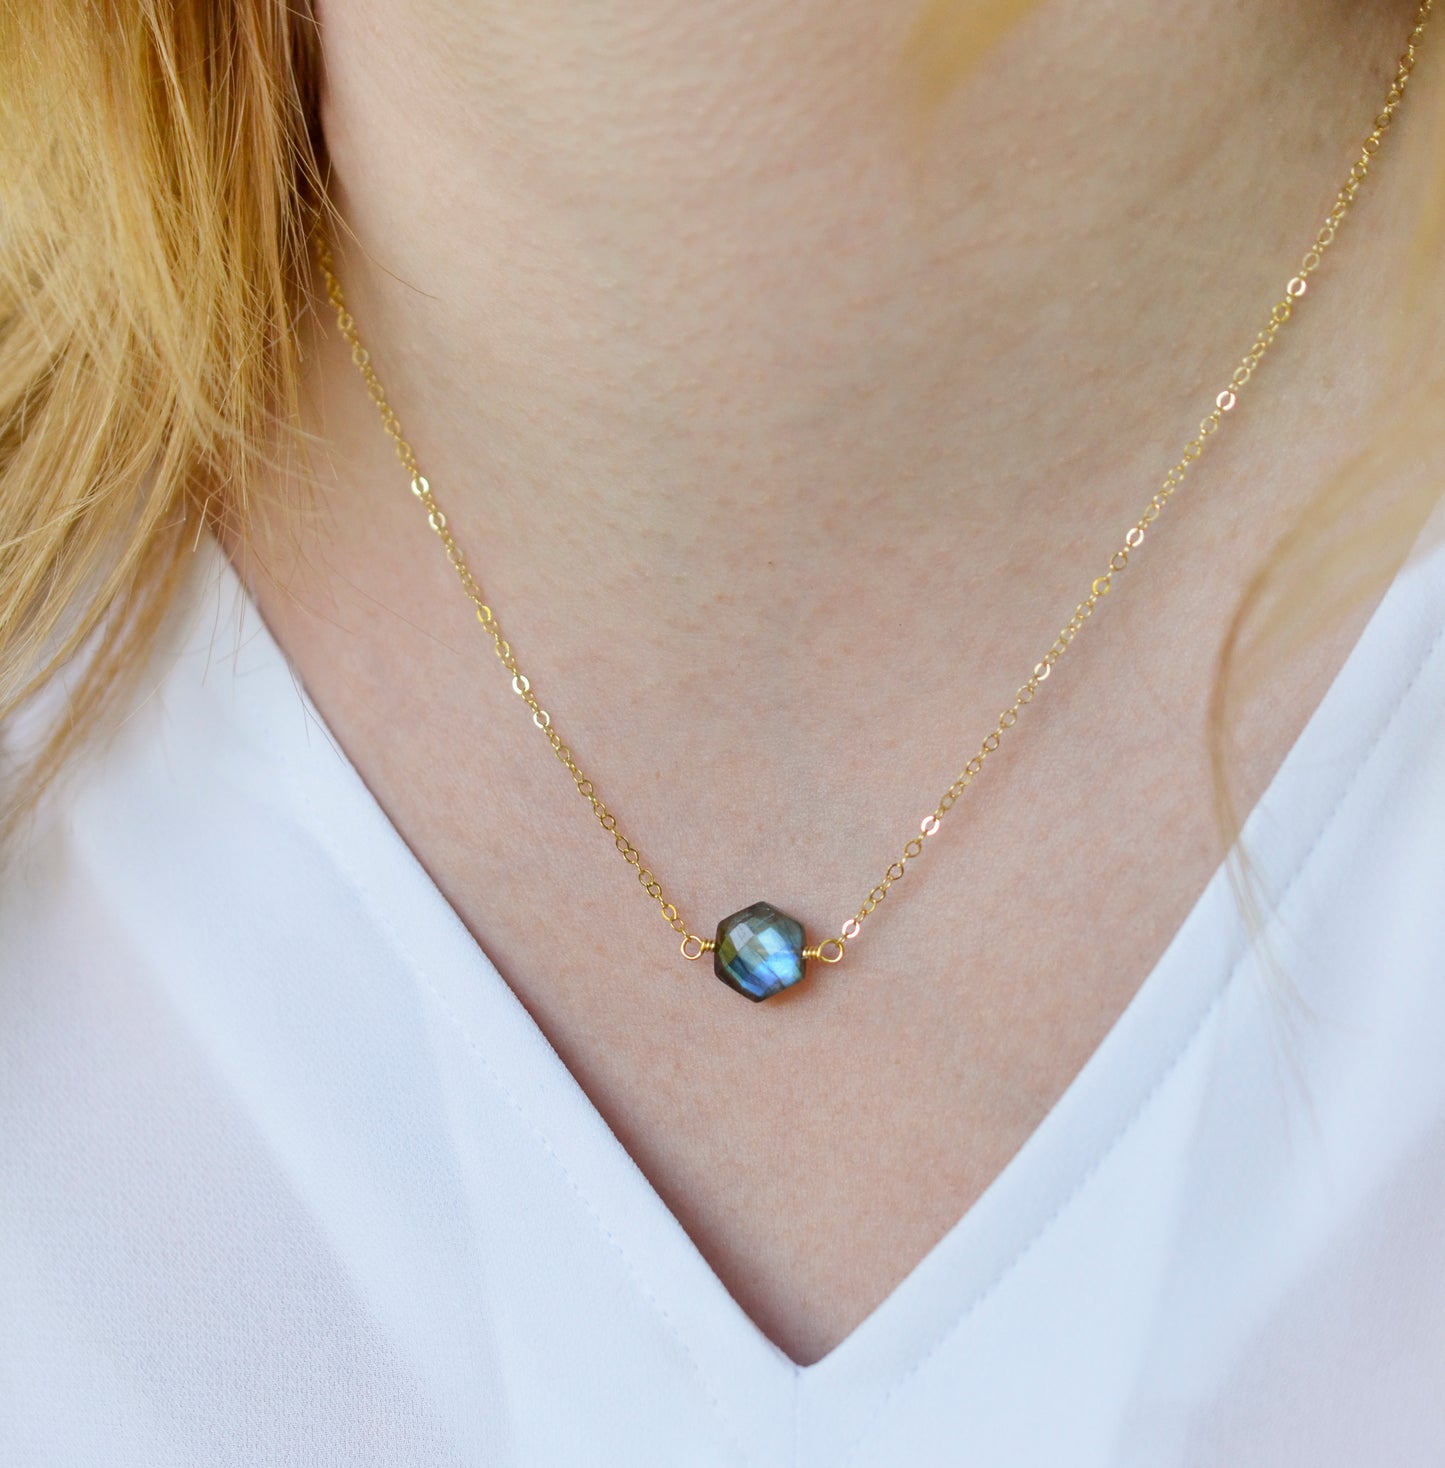 Blue-green flashing hexagonal Labradorite gemstone modeled in 14k gold filled and the fixed style.